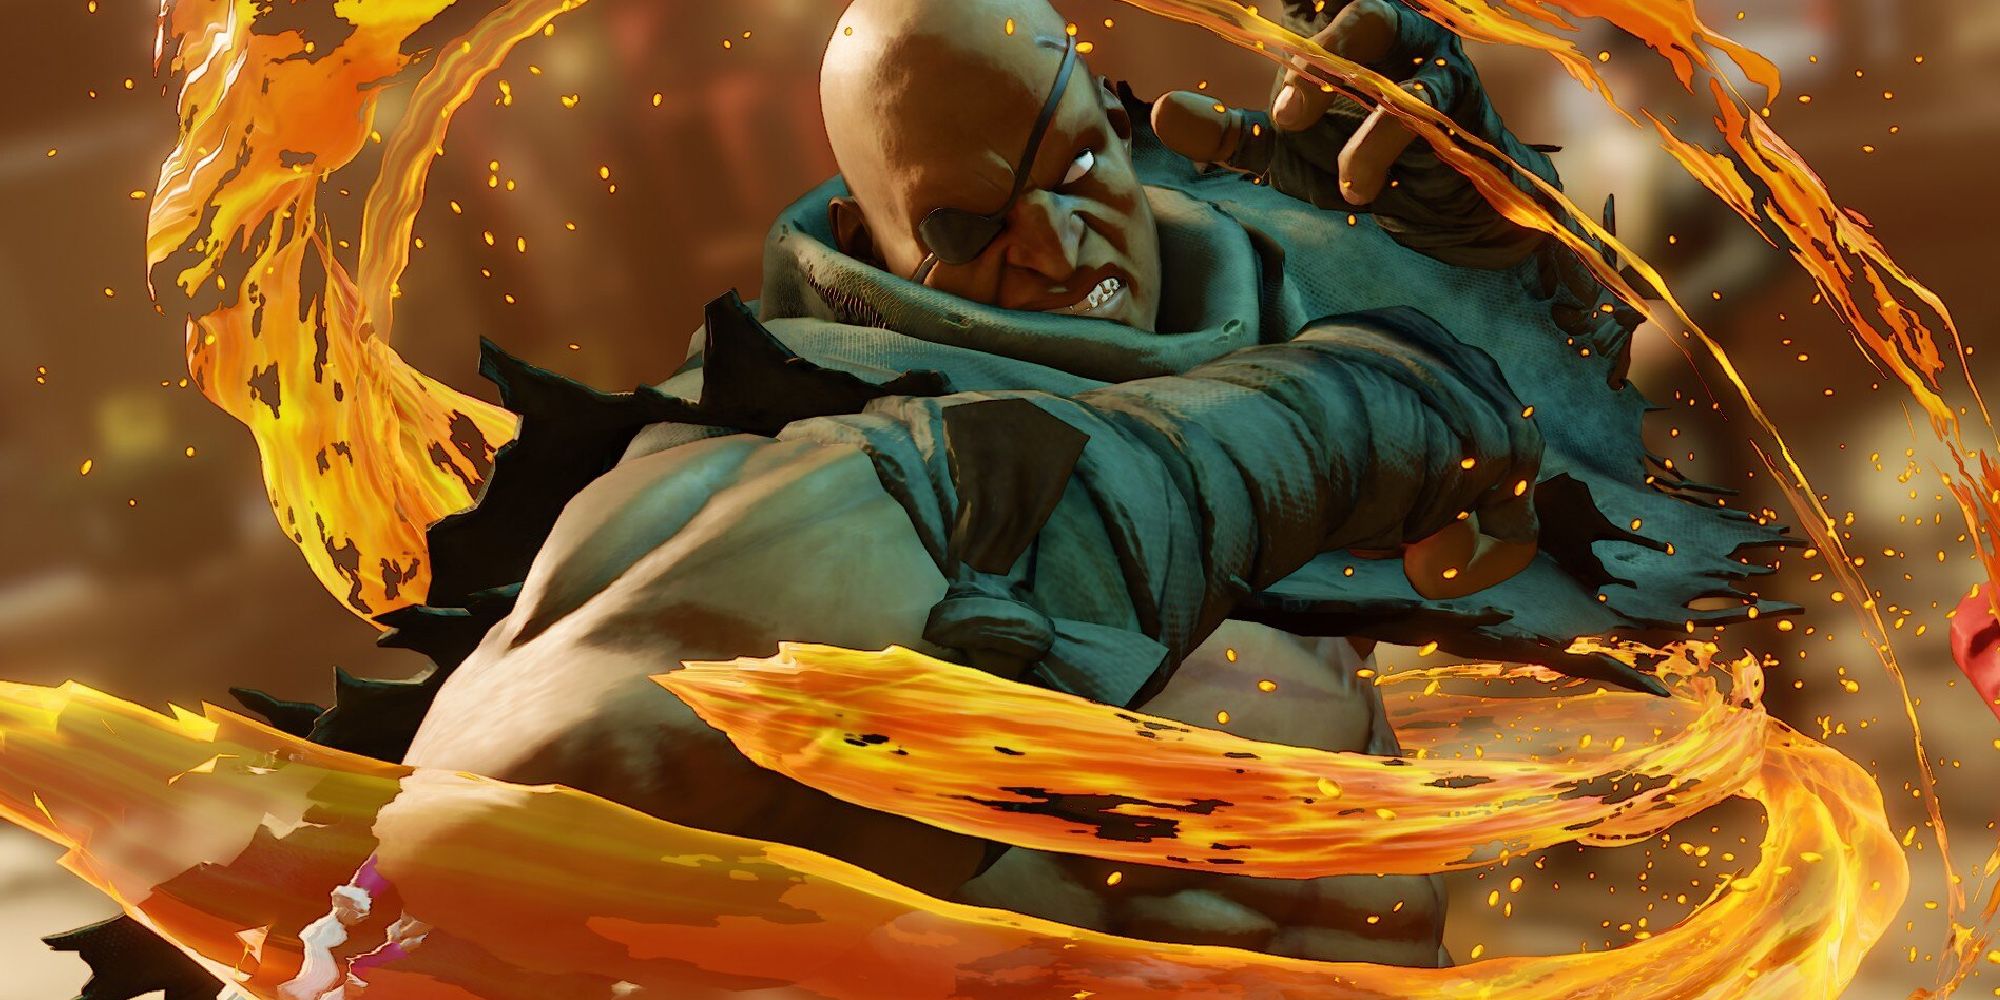 Sagat during an attack animation